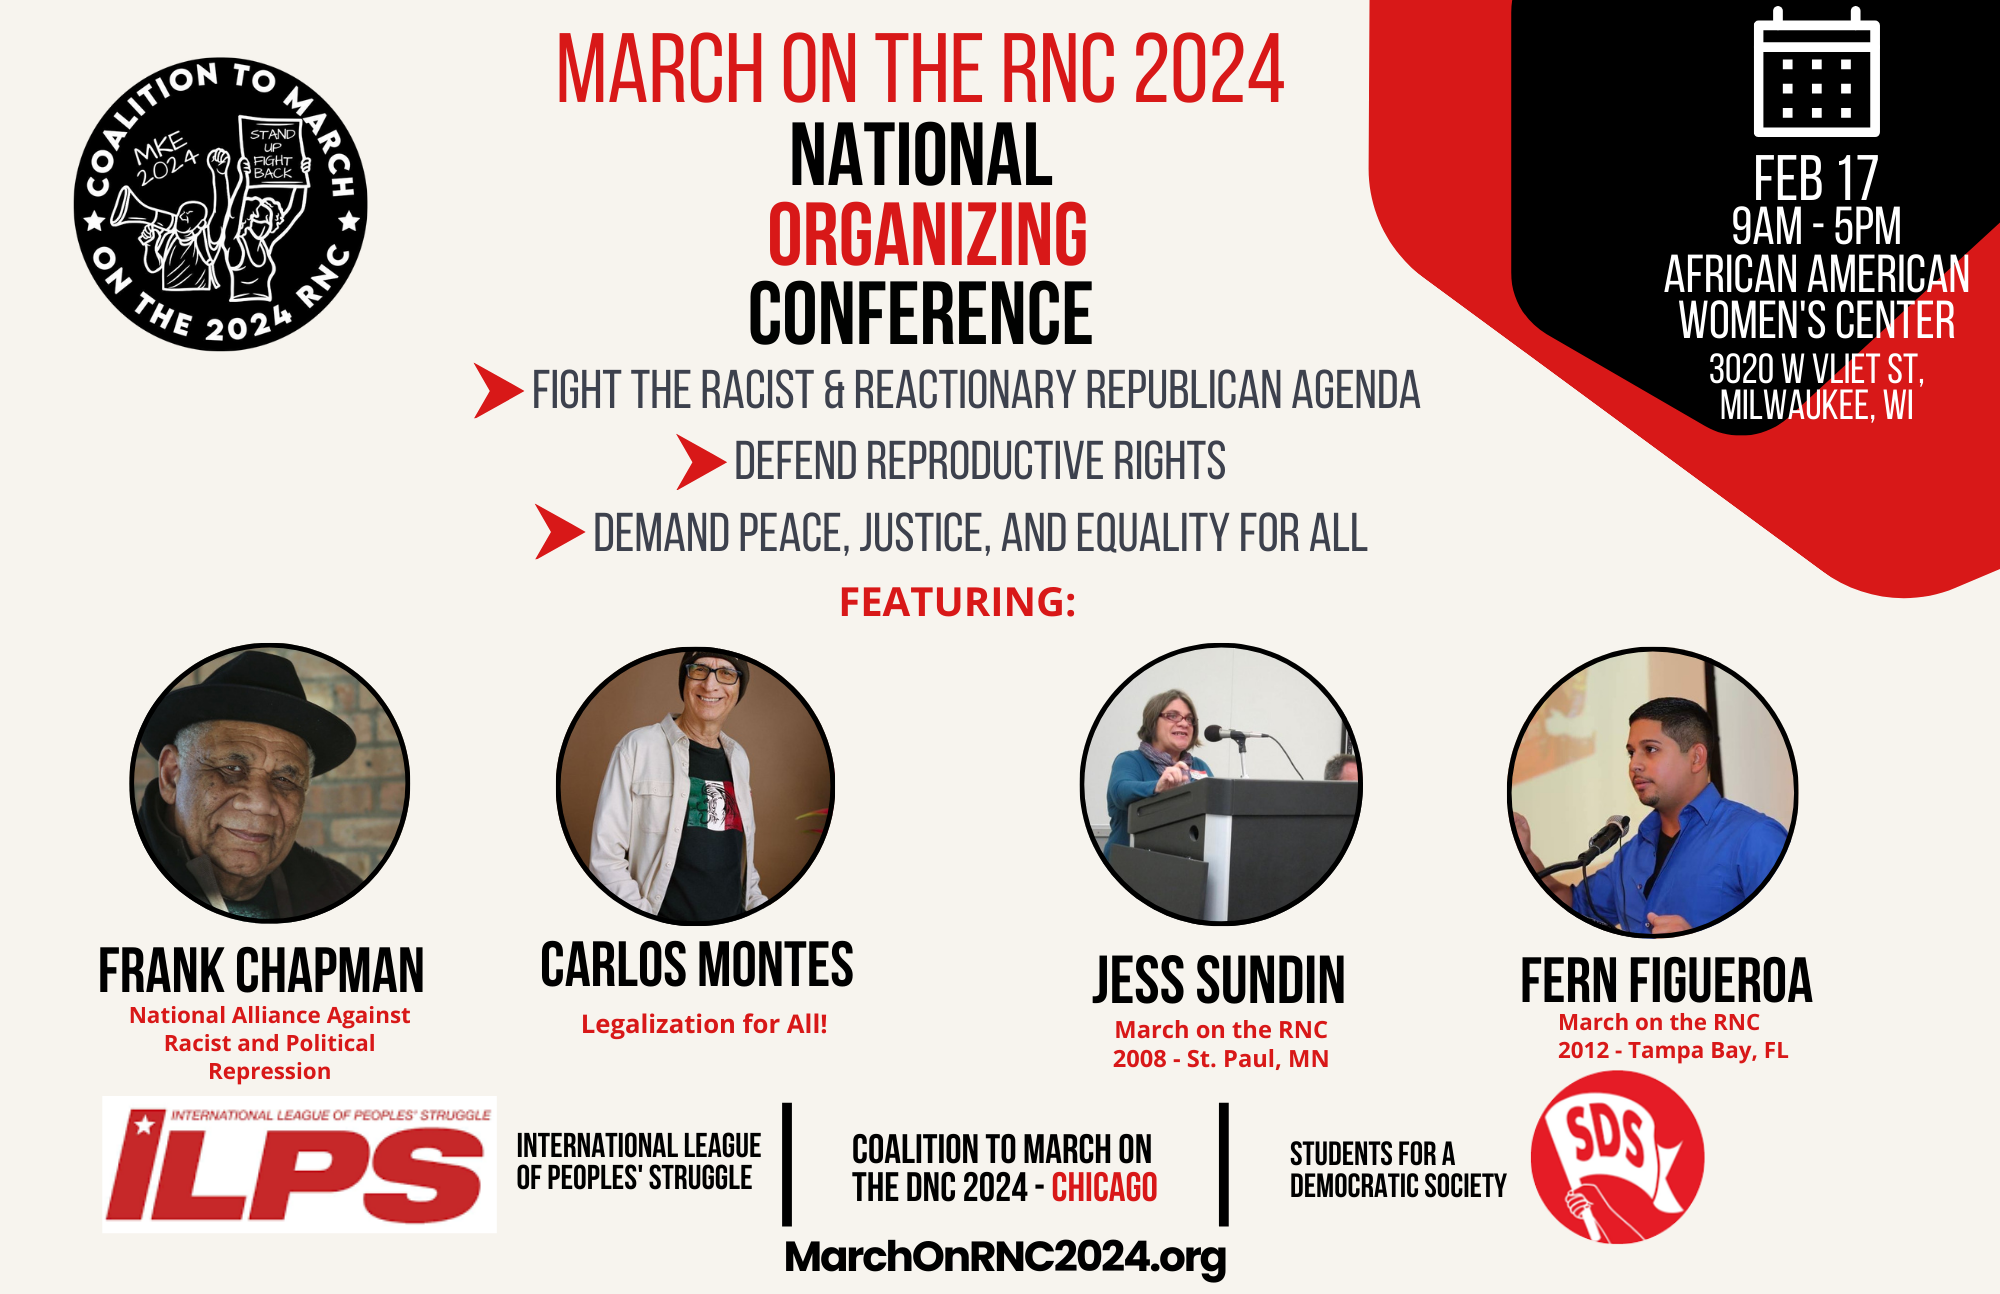 March on the RNC 2024 National Organizing Conference